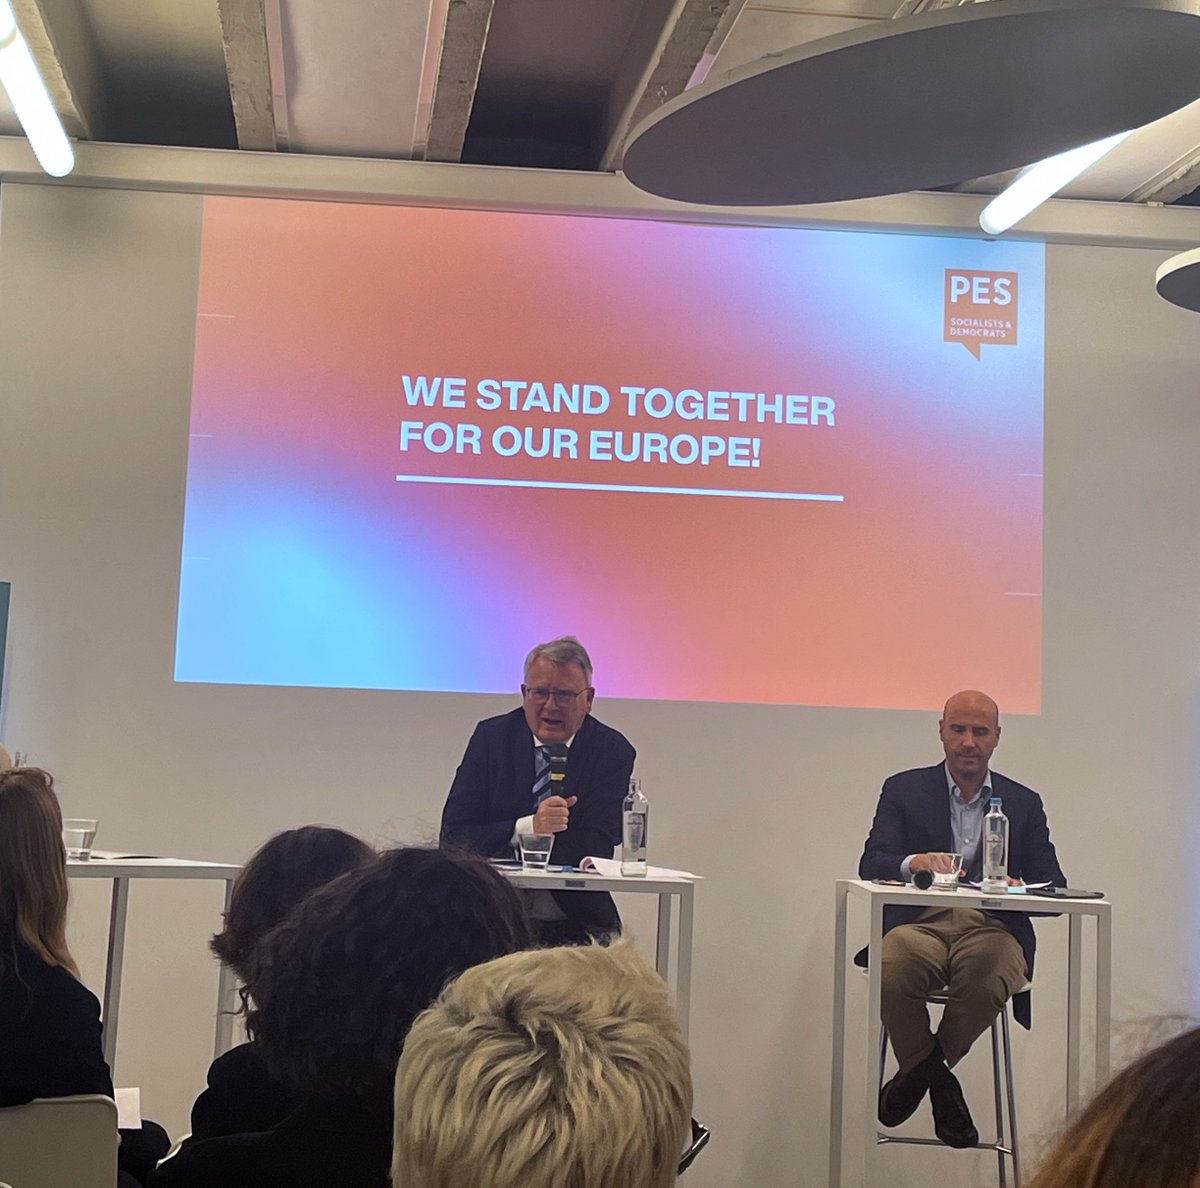 Great to hear @NicolasSchmitEU highlighting the importance of #SocialEurope and his commitment to working on minimum income, housing, care & social economy in the next mandate! #Socialrights #OvertheLine